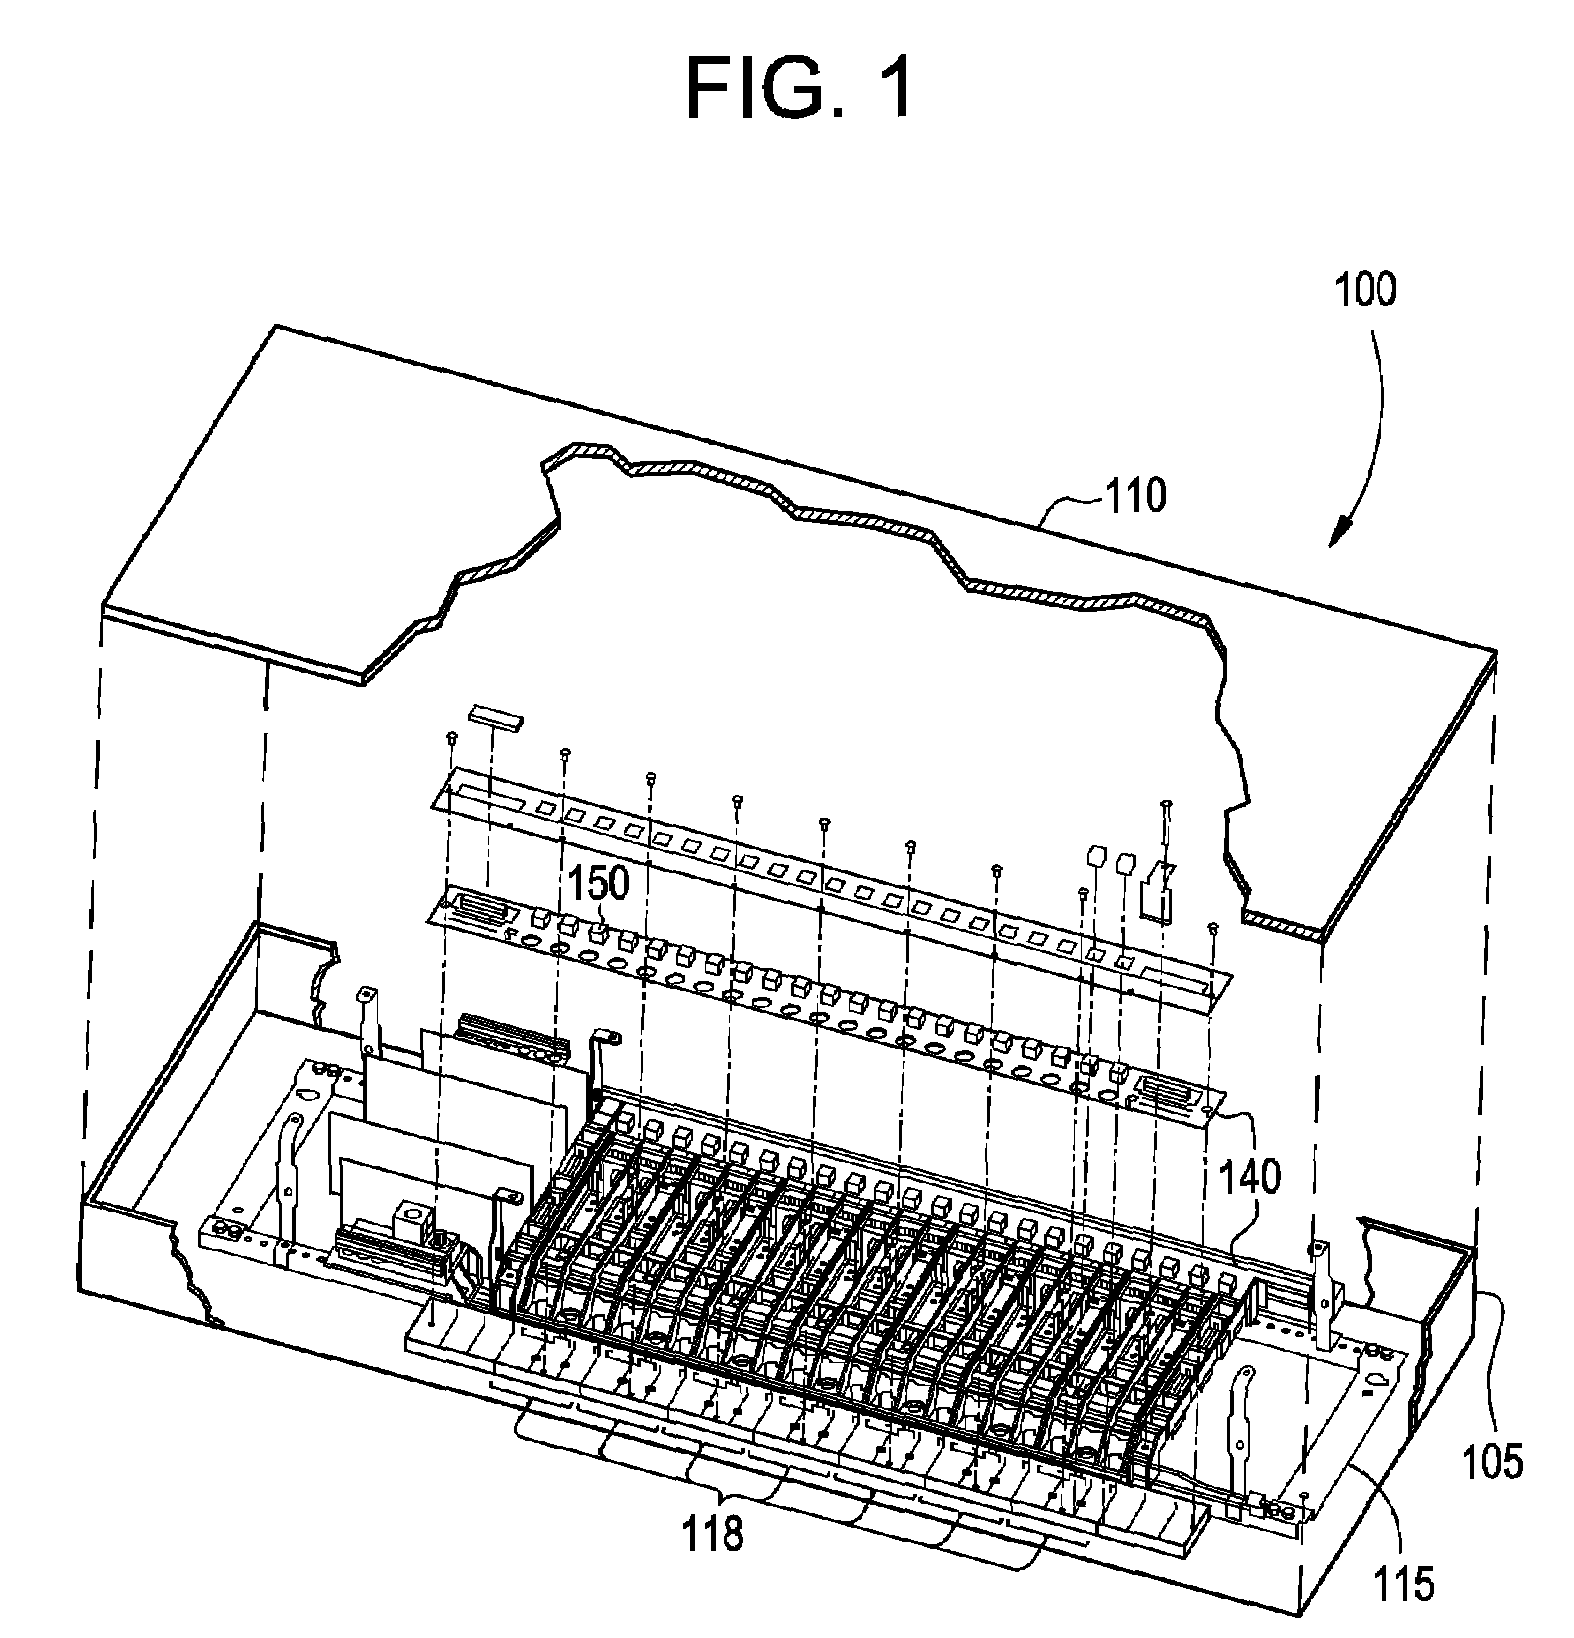 Apparatus for interfacing remote operated and non-remote operated circuit breakers with an electrical panel